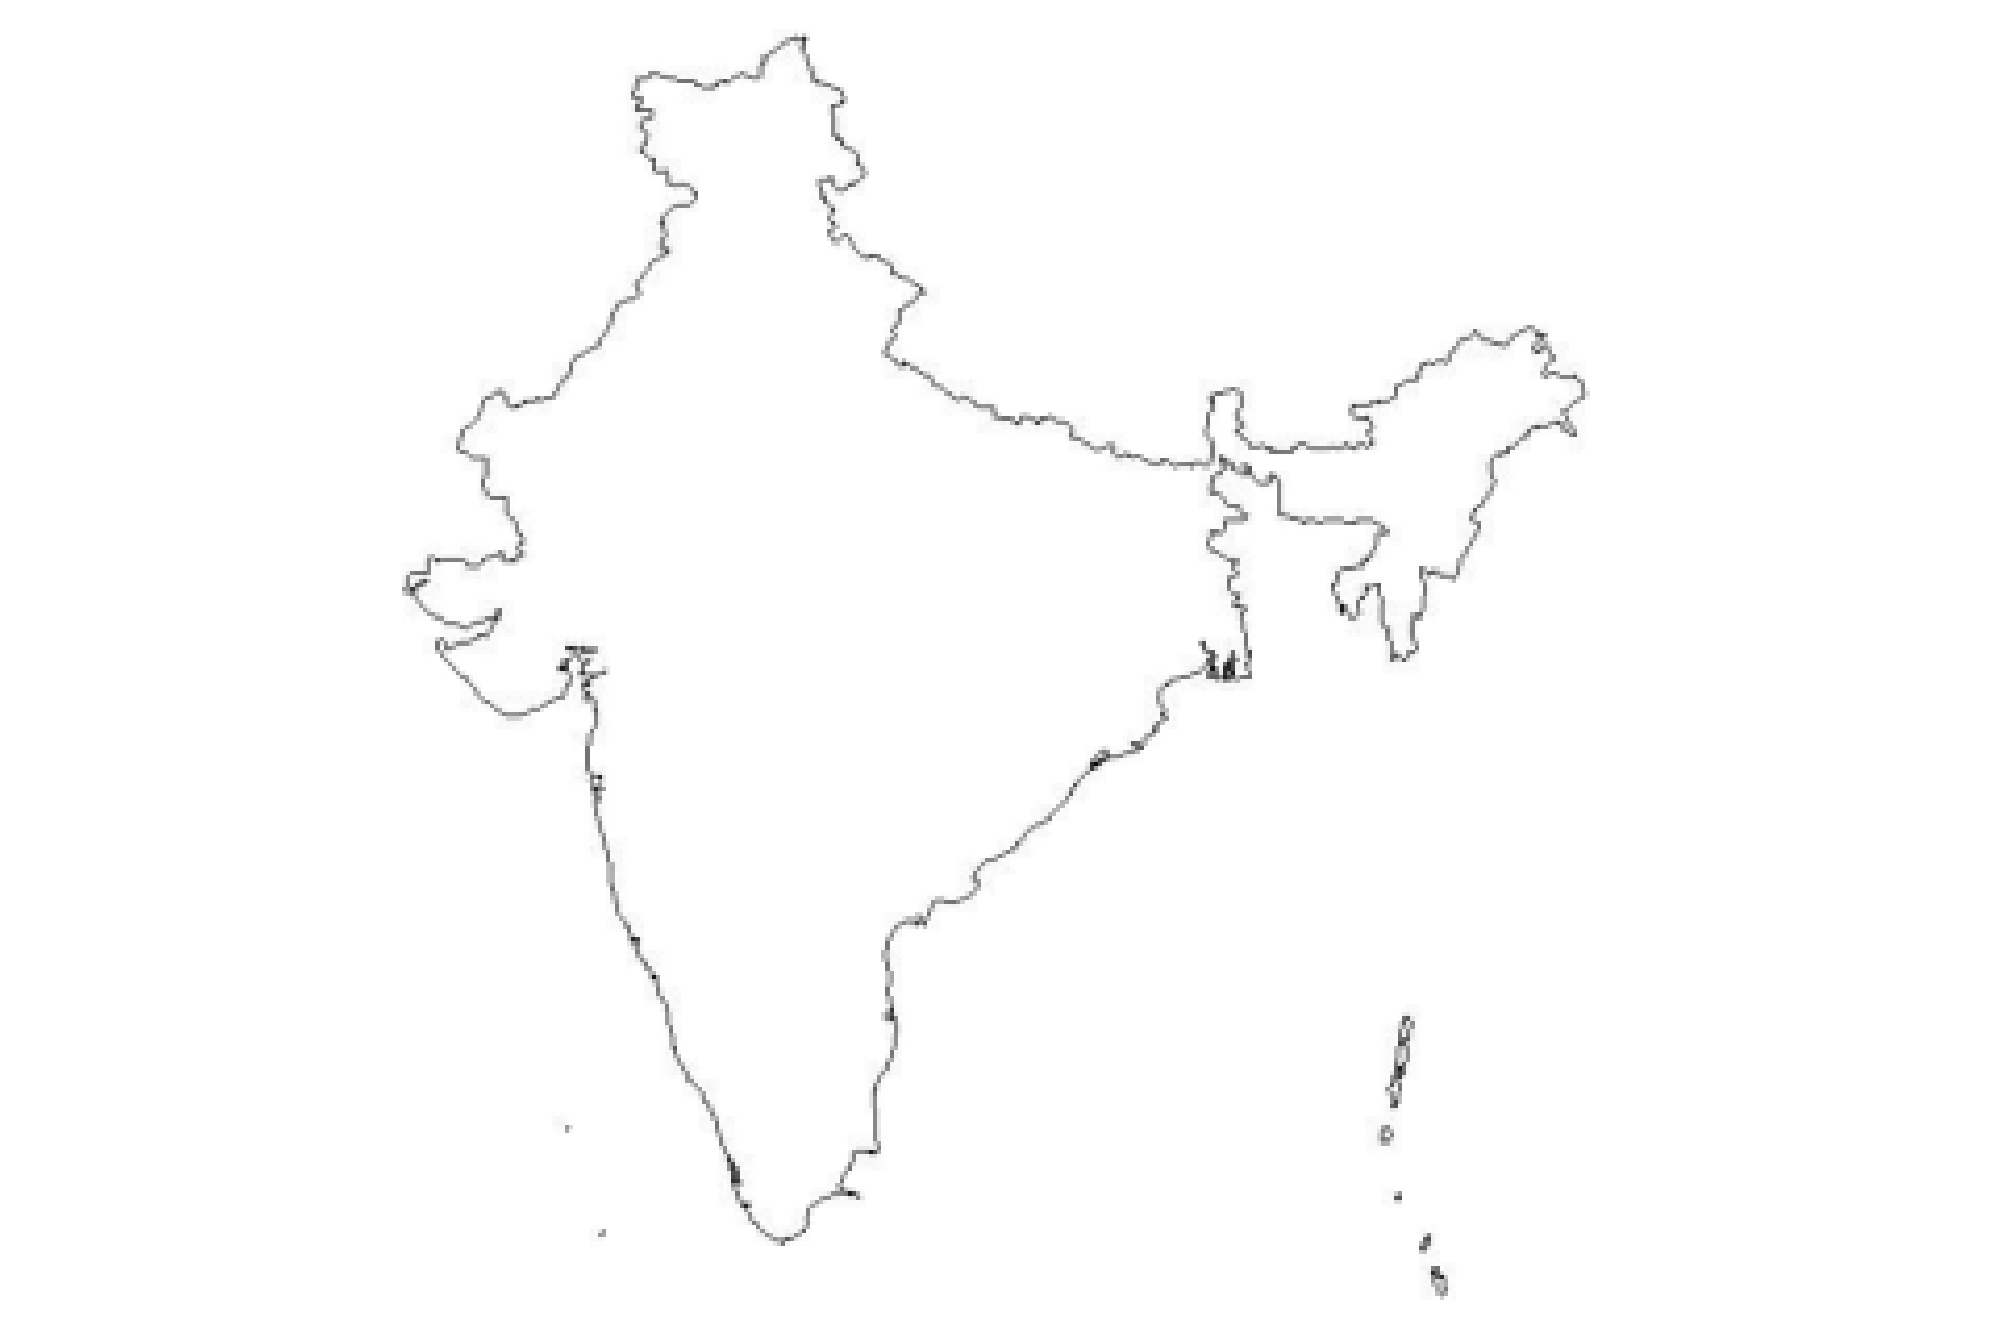   1. An original image showing a textbook map of India 